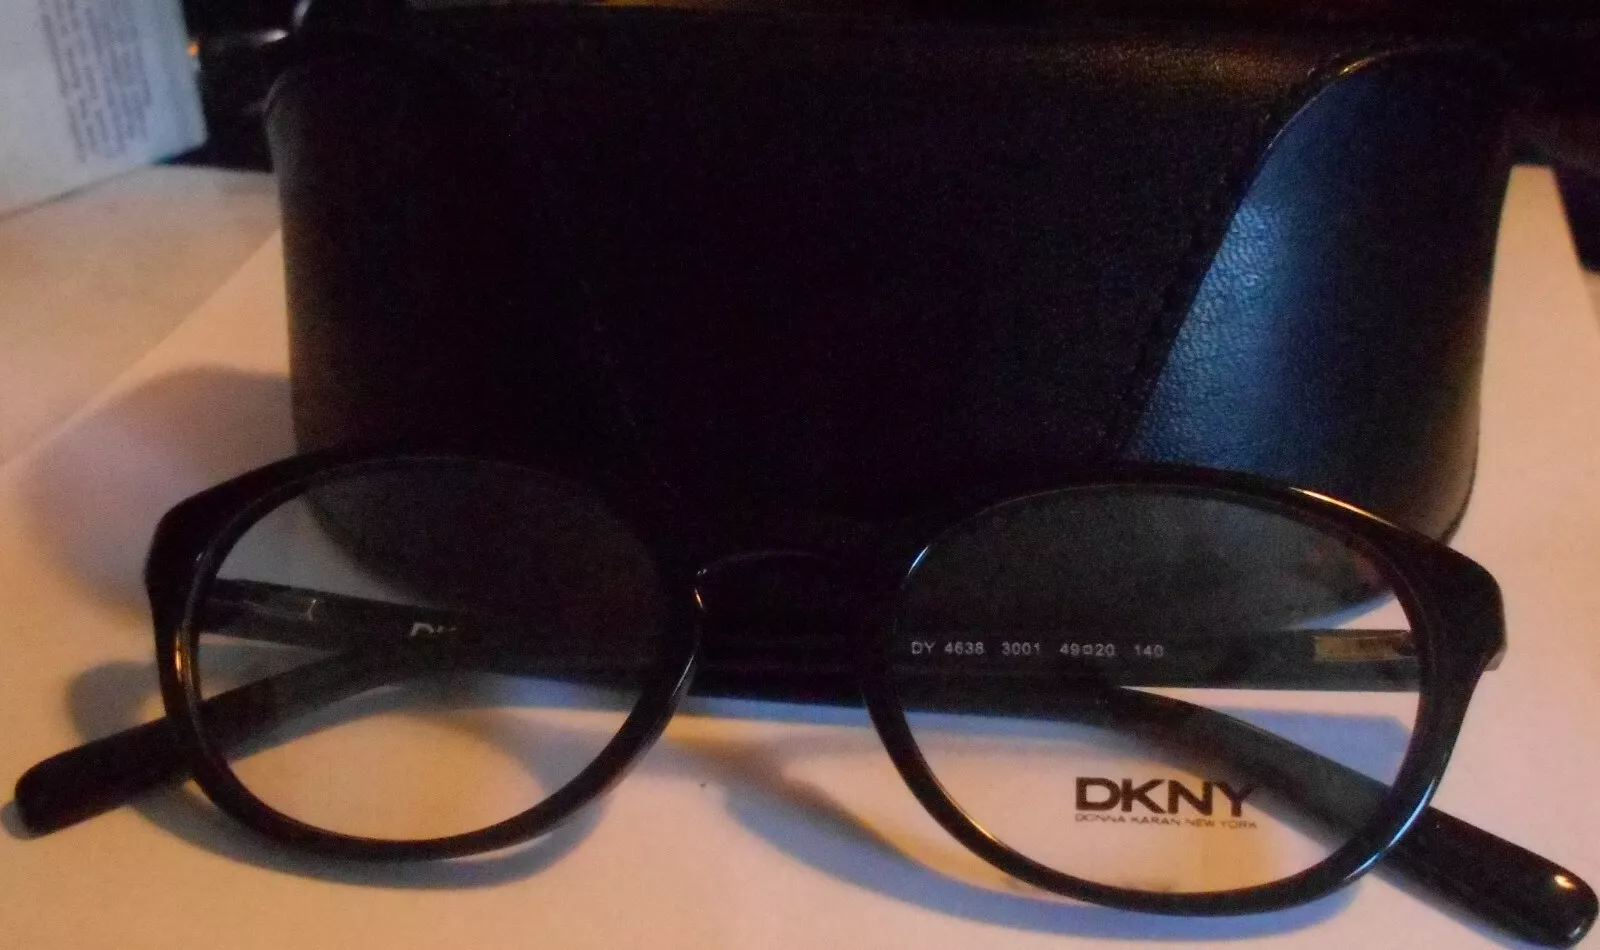 DNKY Glasses/Frames 4638 3001 49 20 140 -new with case - brand new - $25.00